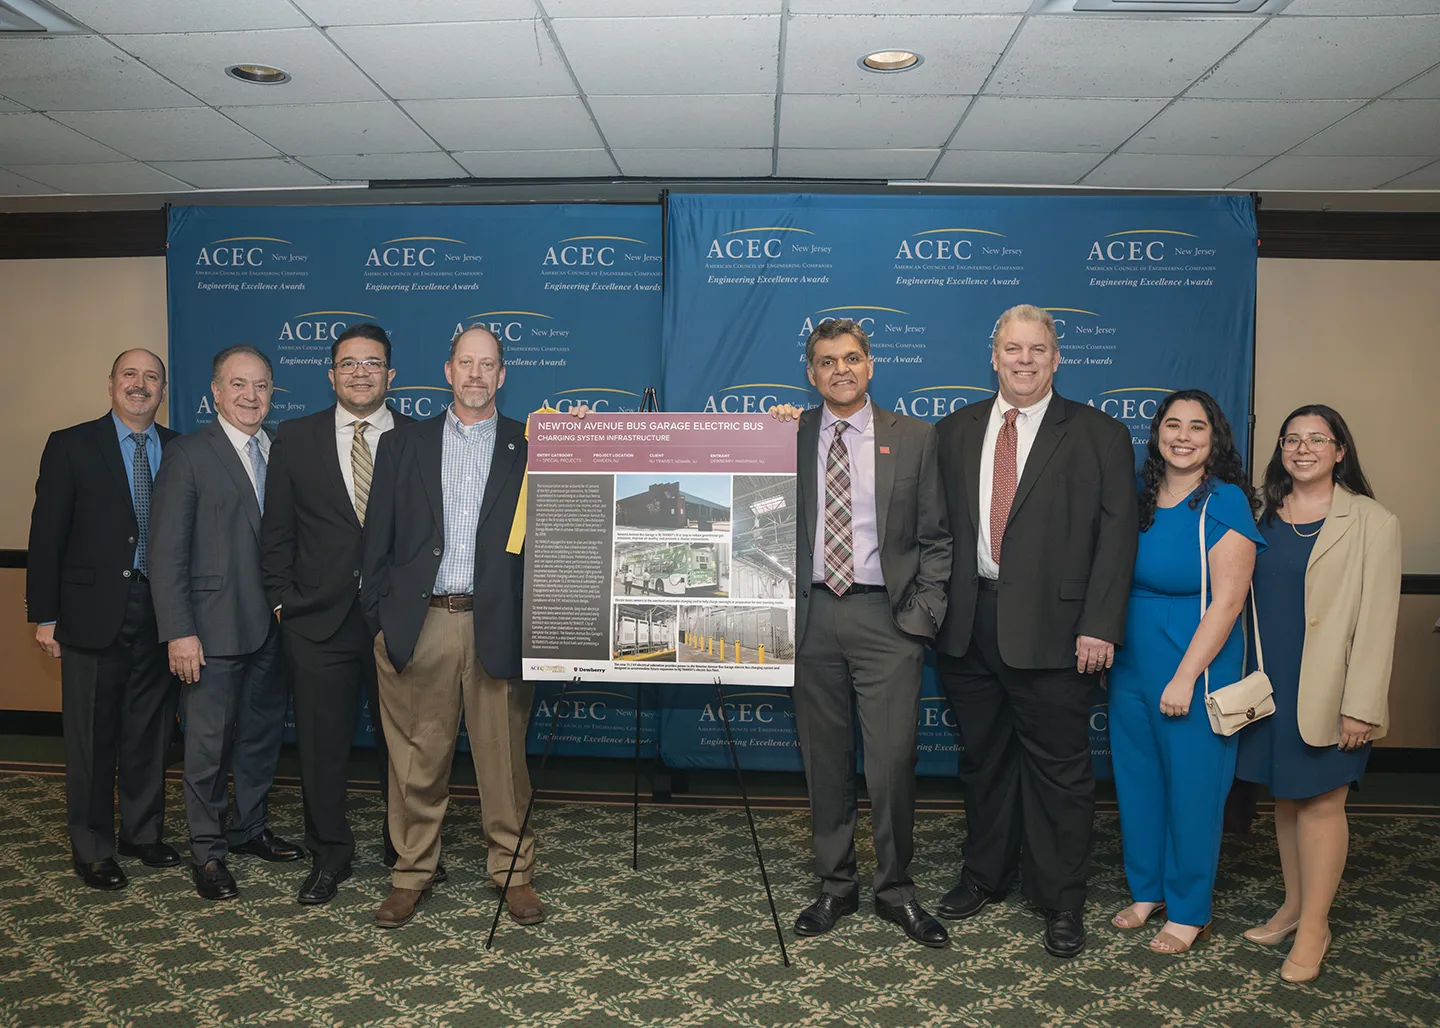 The project team for the Newton Avenue Bus Garage Electric Bus Charging System Infrastructure project at the ACEC NJ Engineering Excellence awards dinner event.